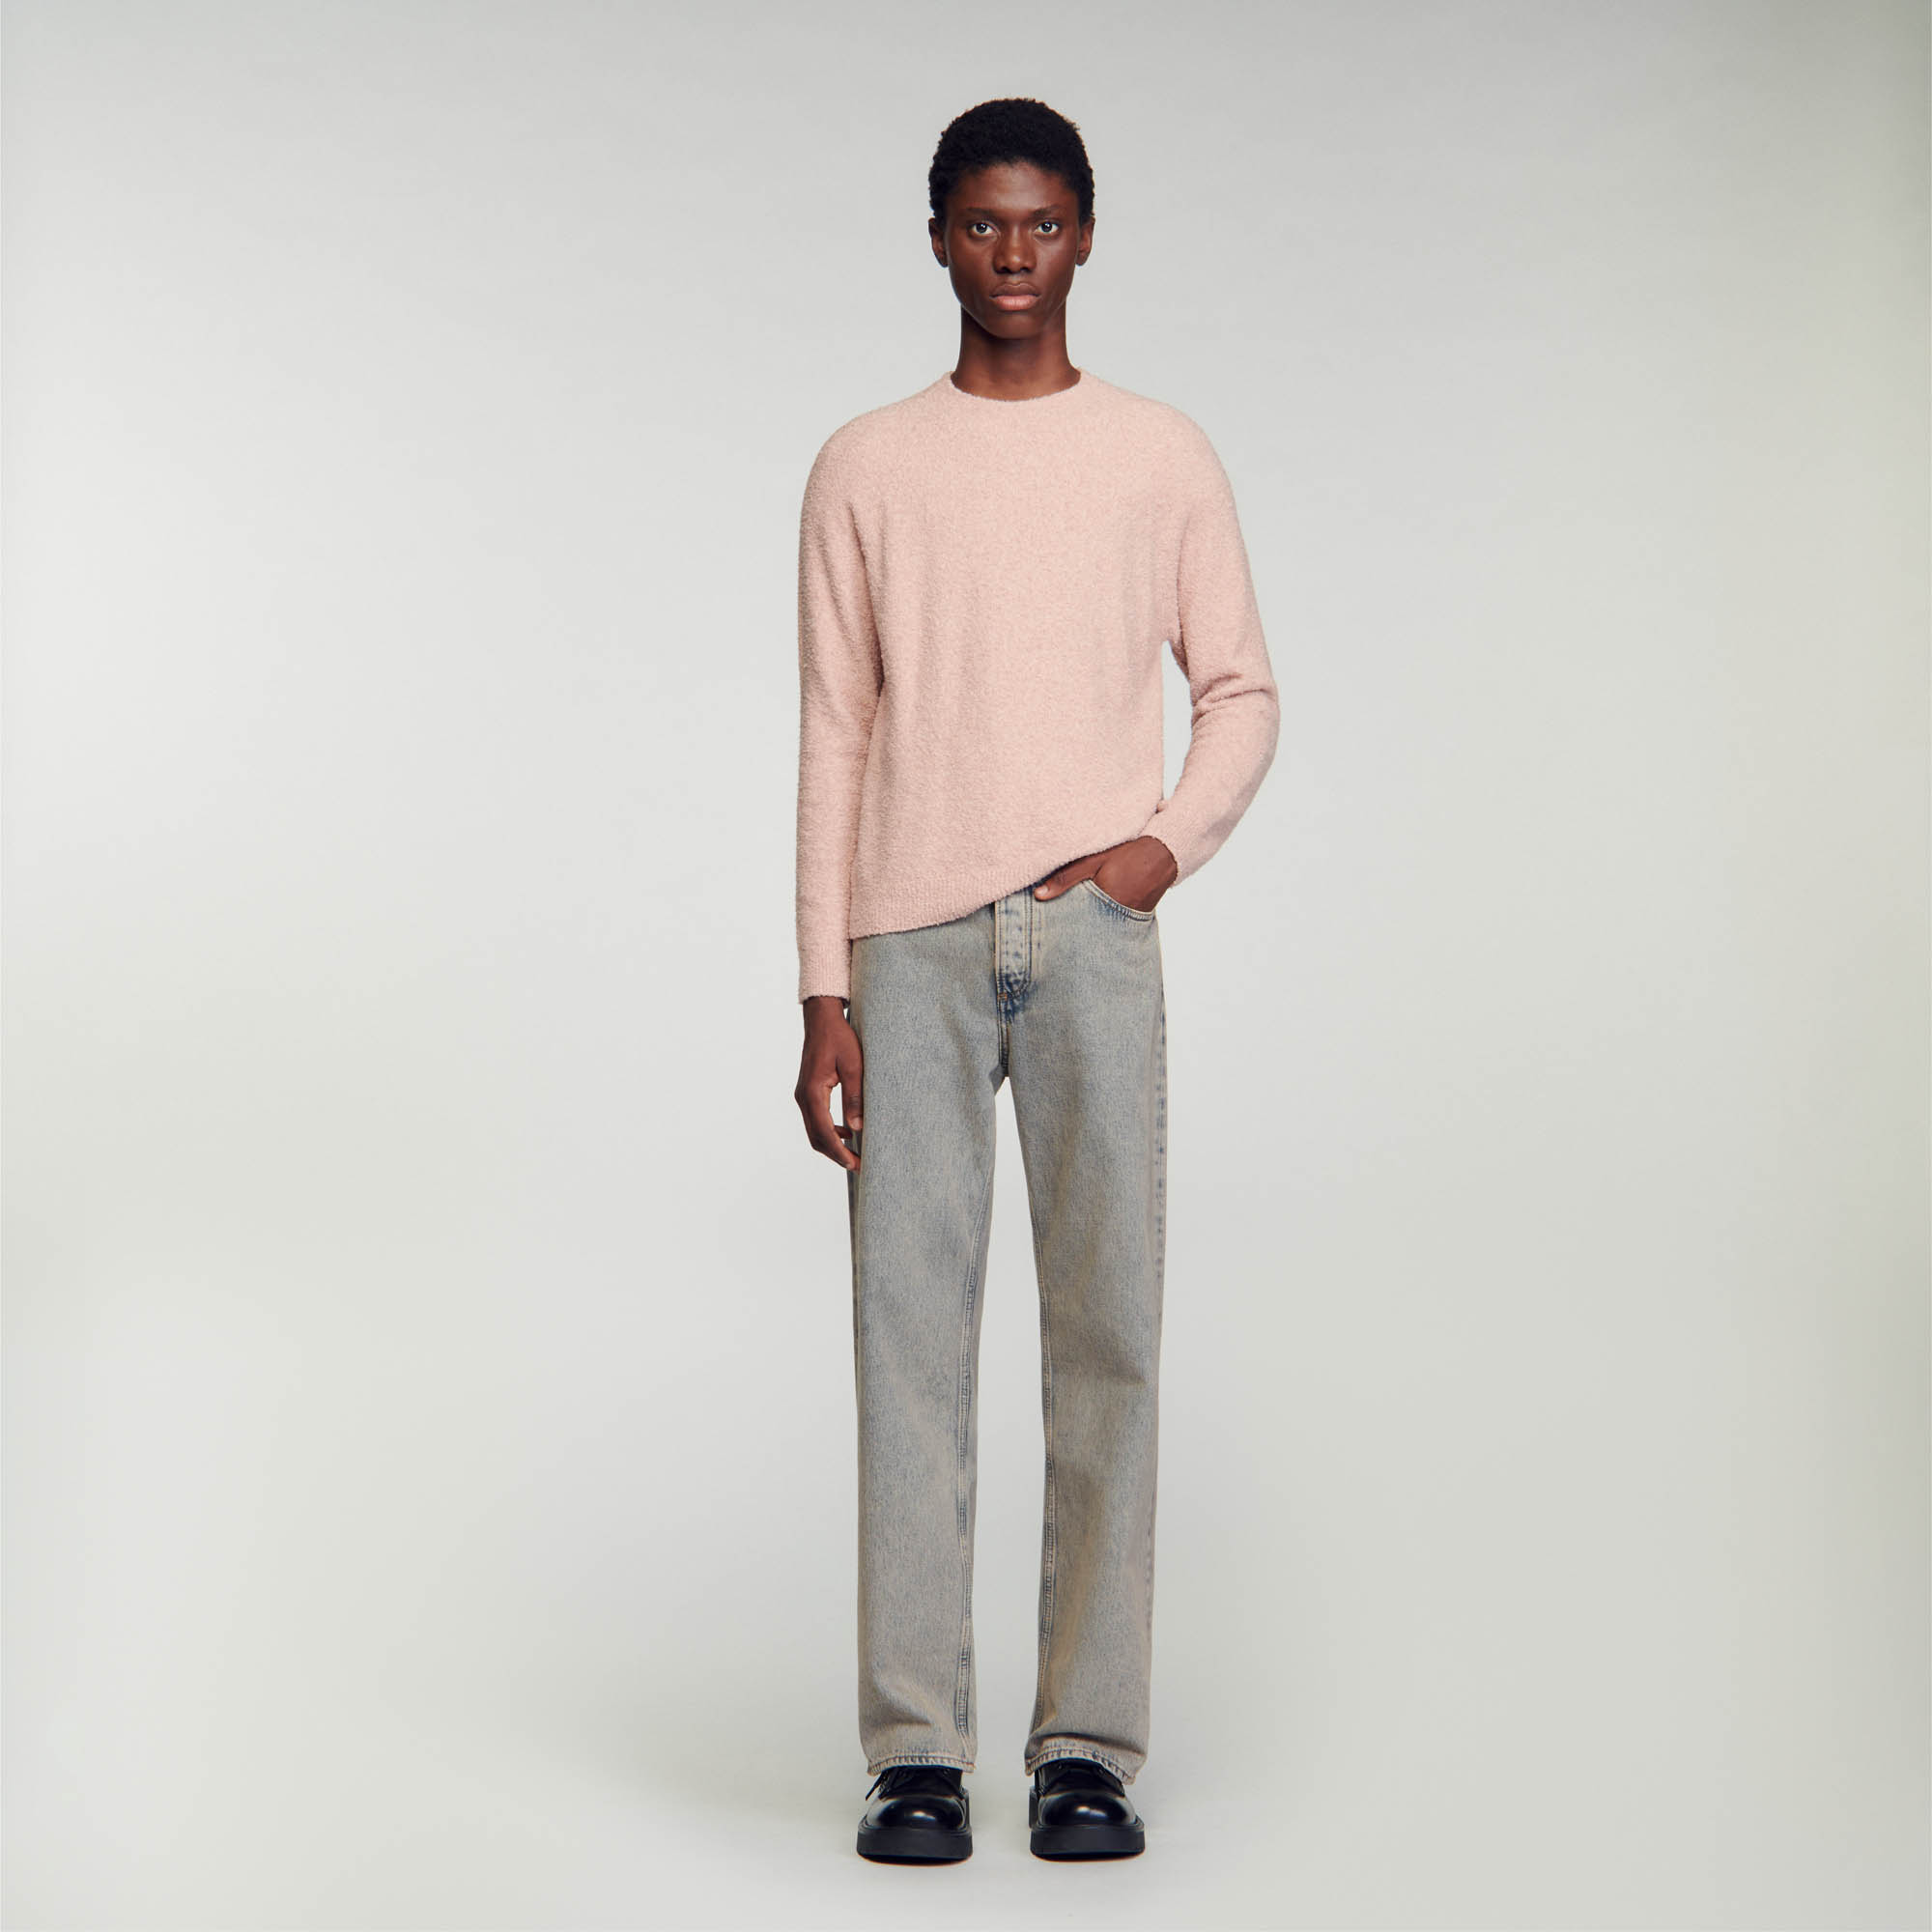 Sandro cotton Long-sleeved sweater